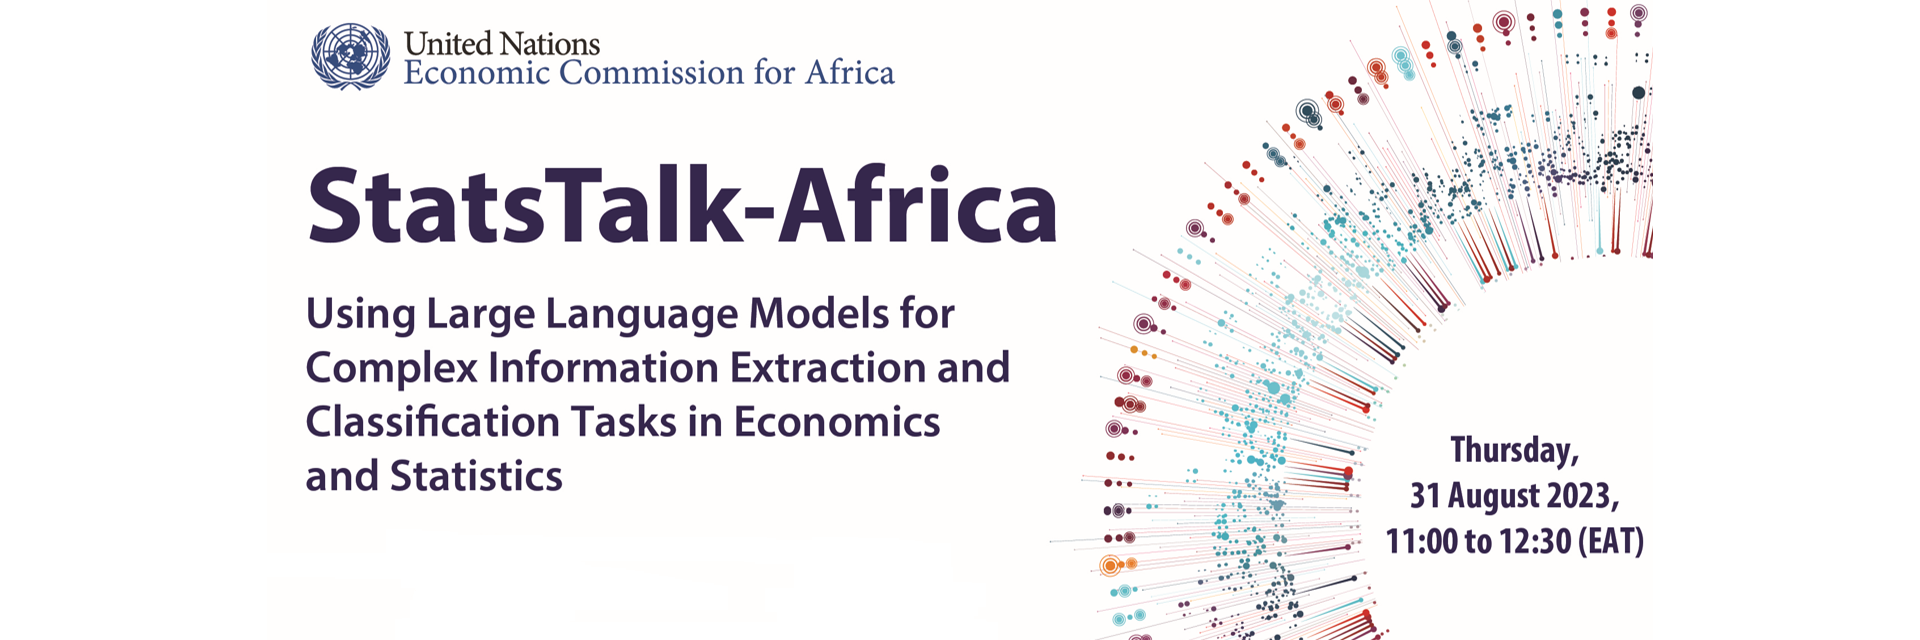 StatsTalk-Africa webinar series: Using large language models for complex information extraction and classification tasks in economics and statistics